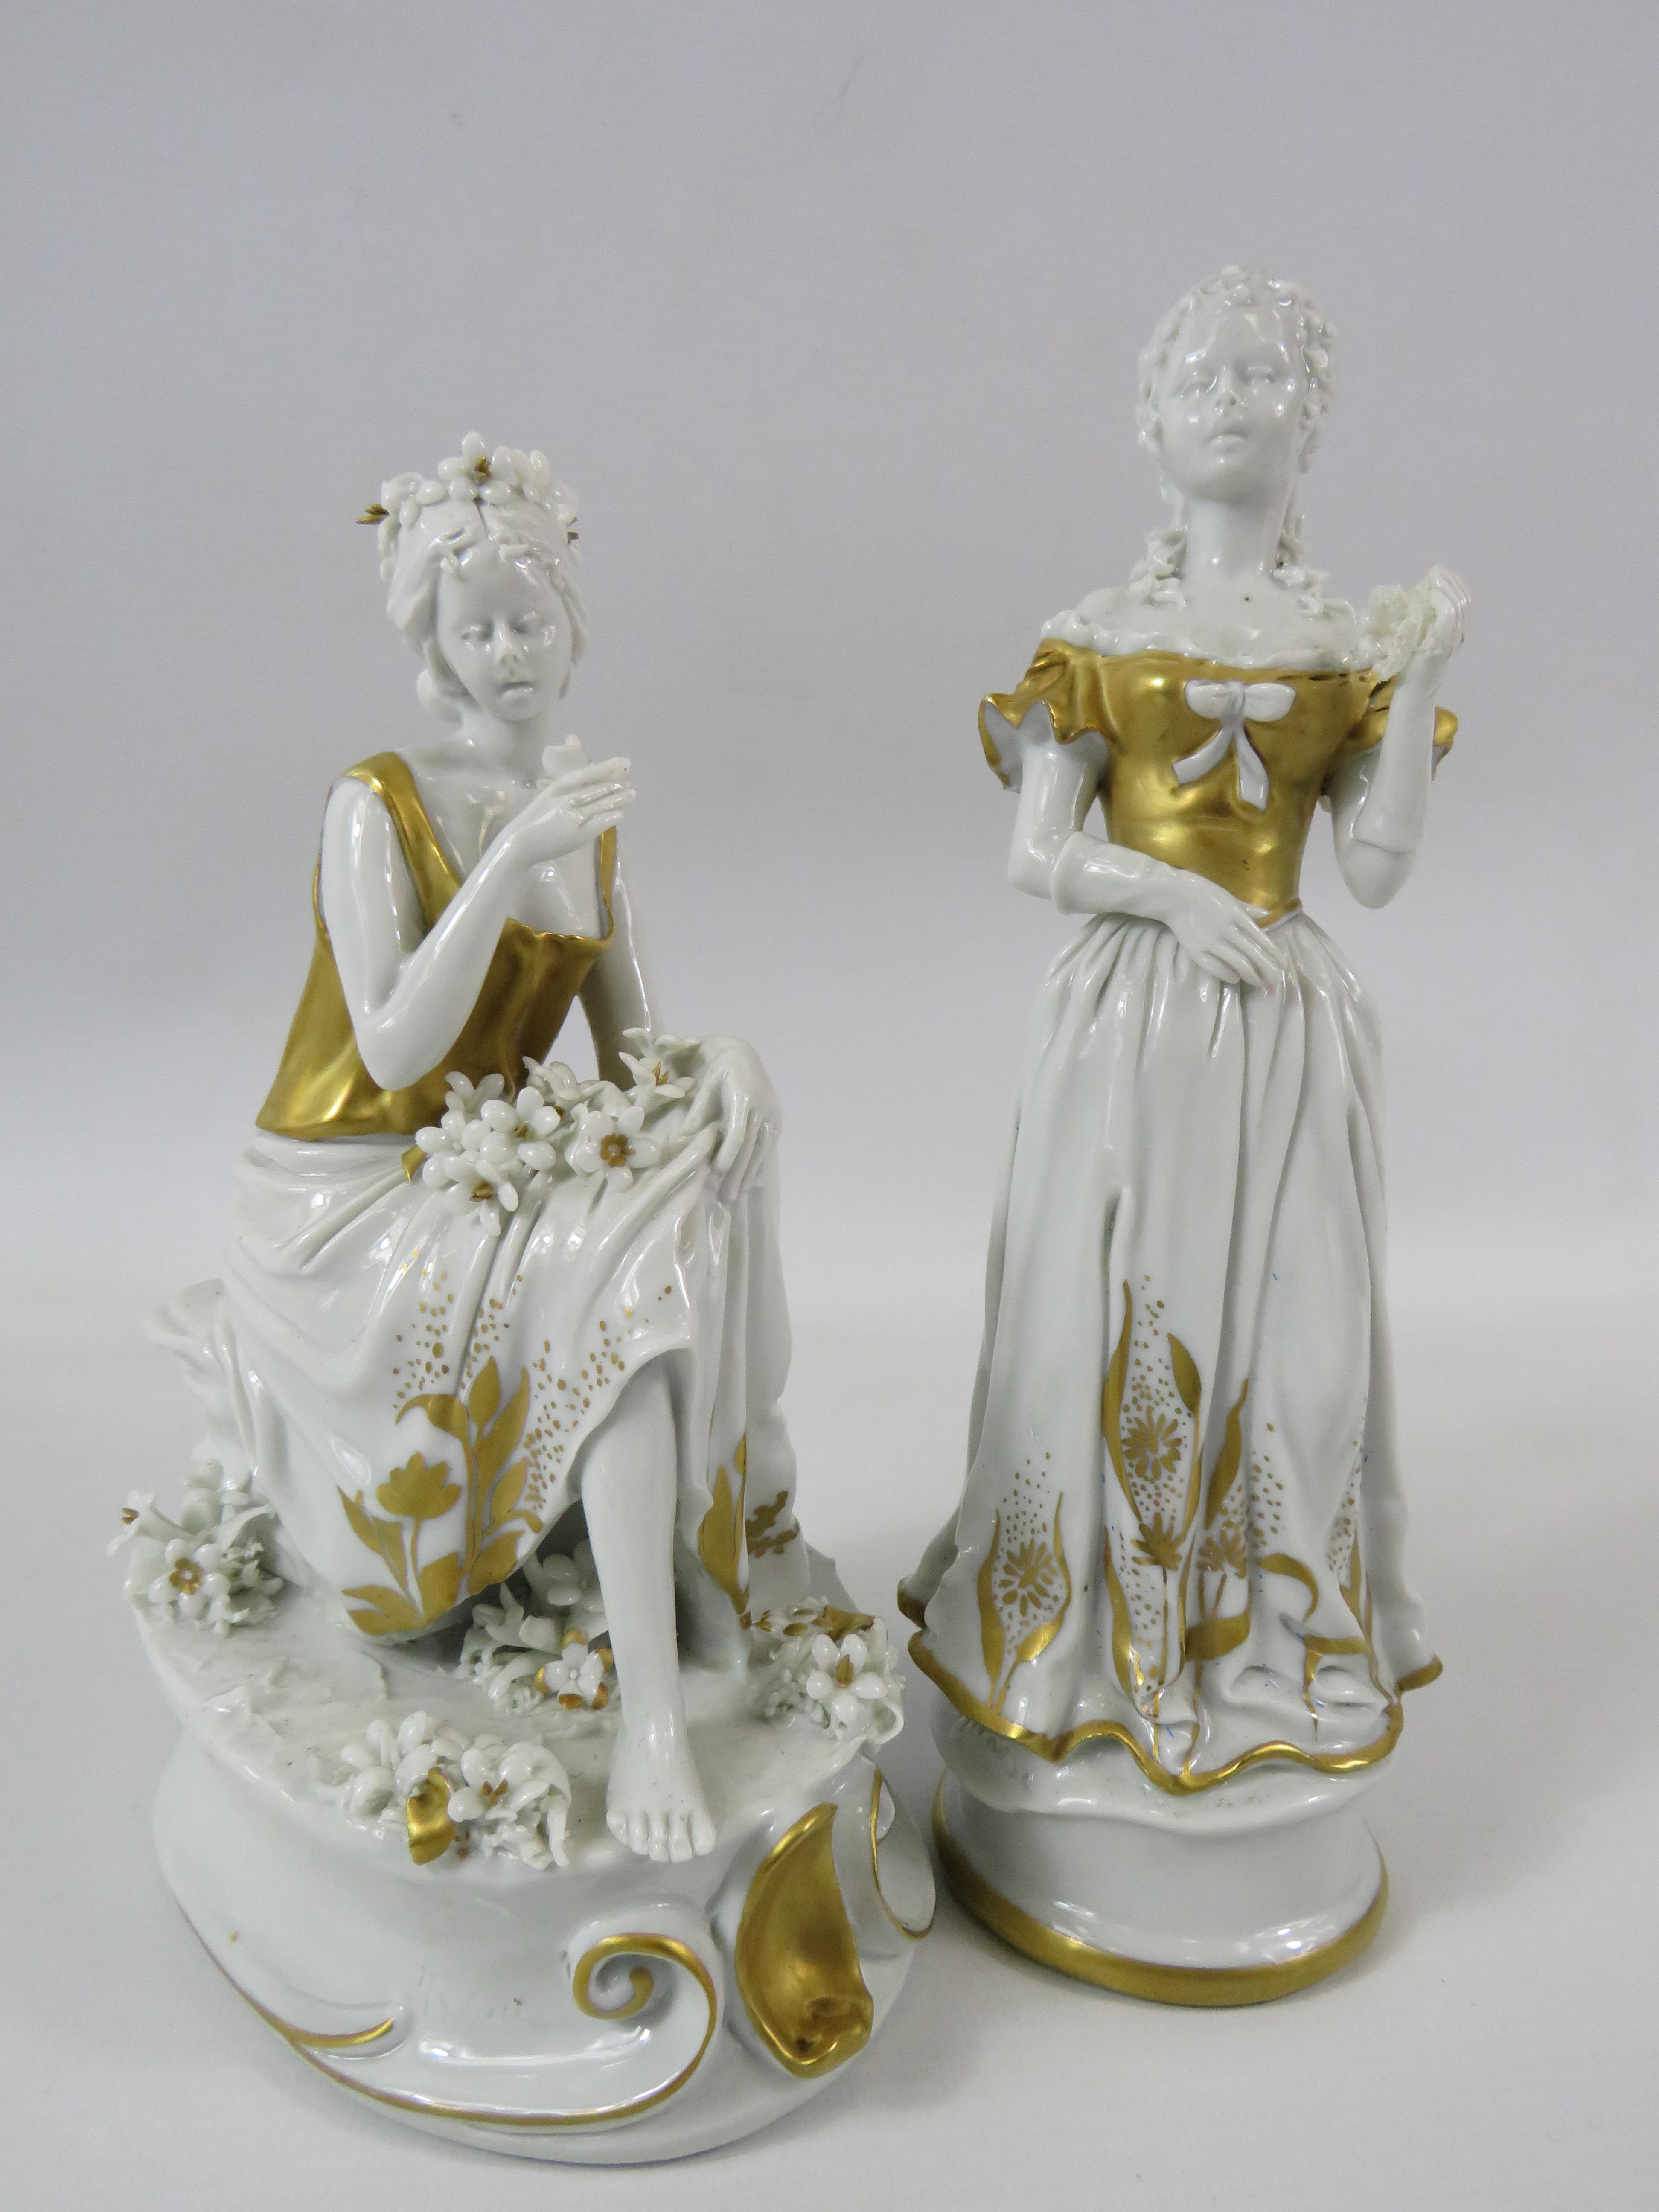 2 Signed Capodimonte white and gold porcelain figurines, the tallest measures 22cm.